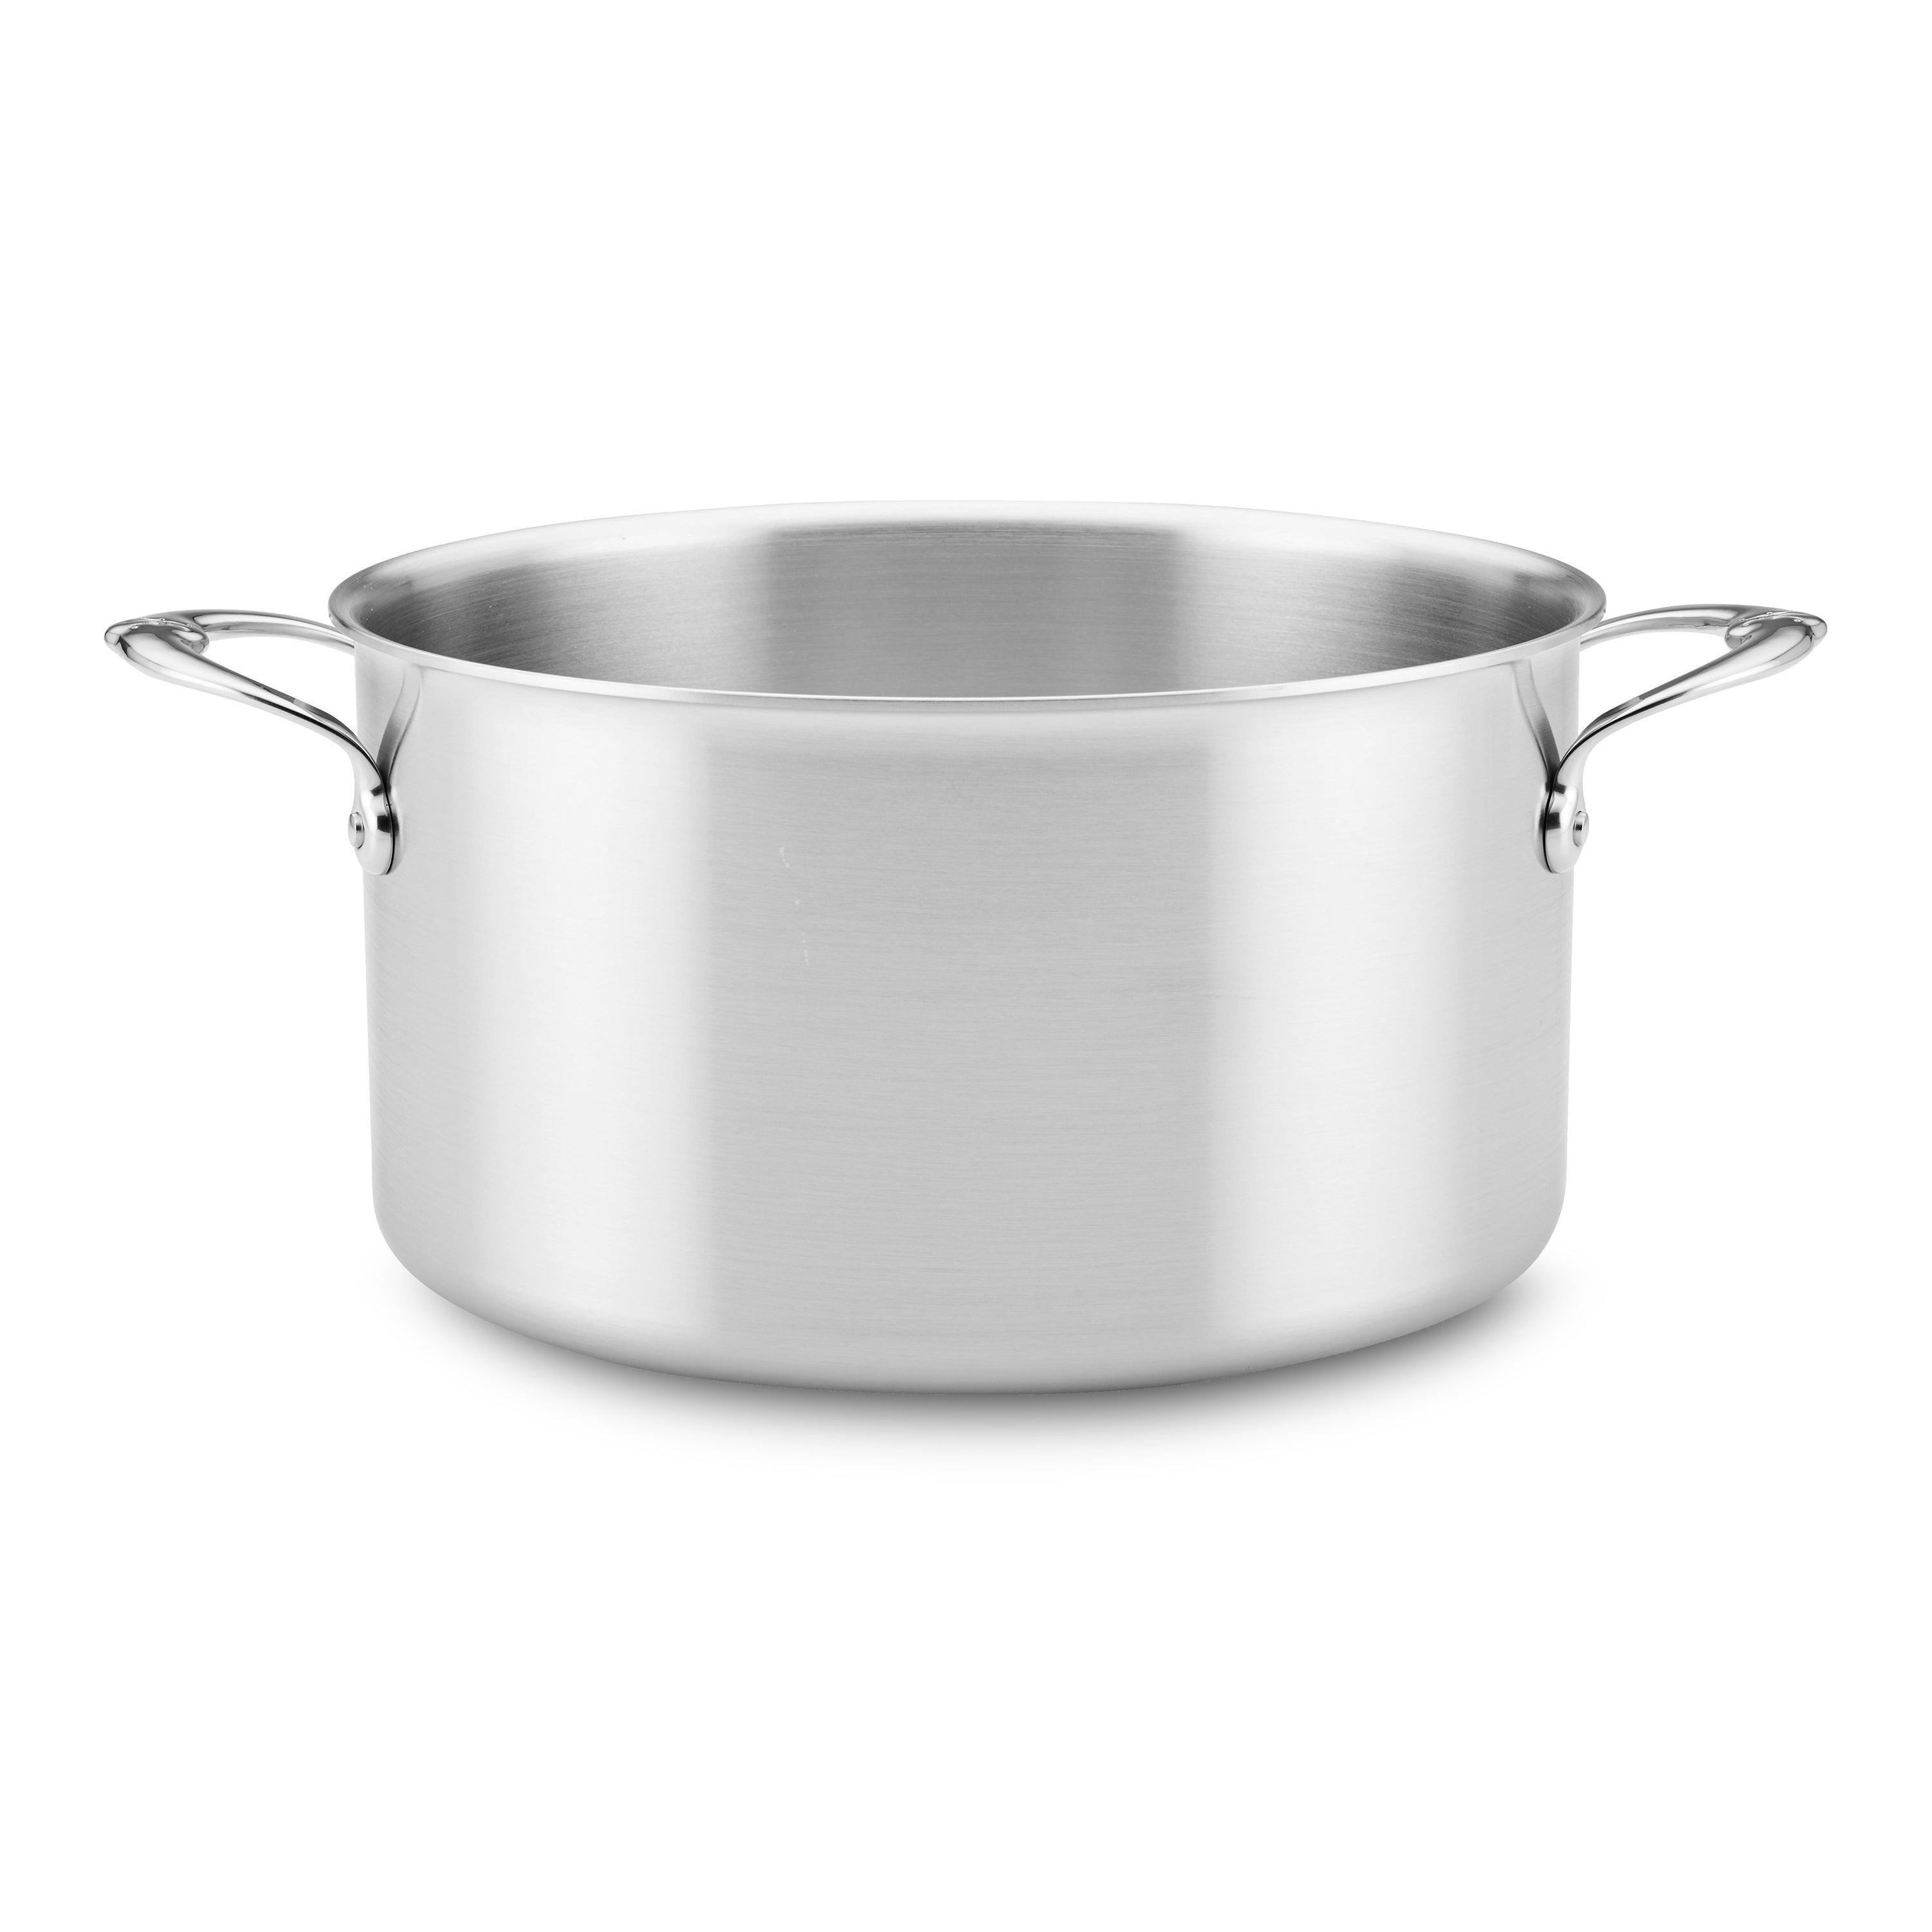 Gourmet Edge 12-quart 18/10 Stainless Steel Stock Pot with Cover